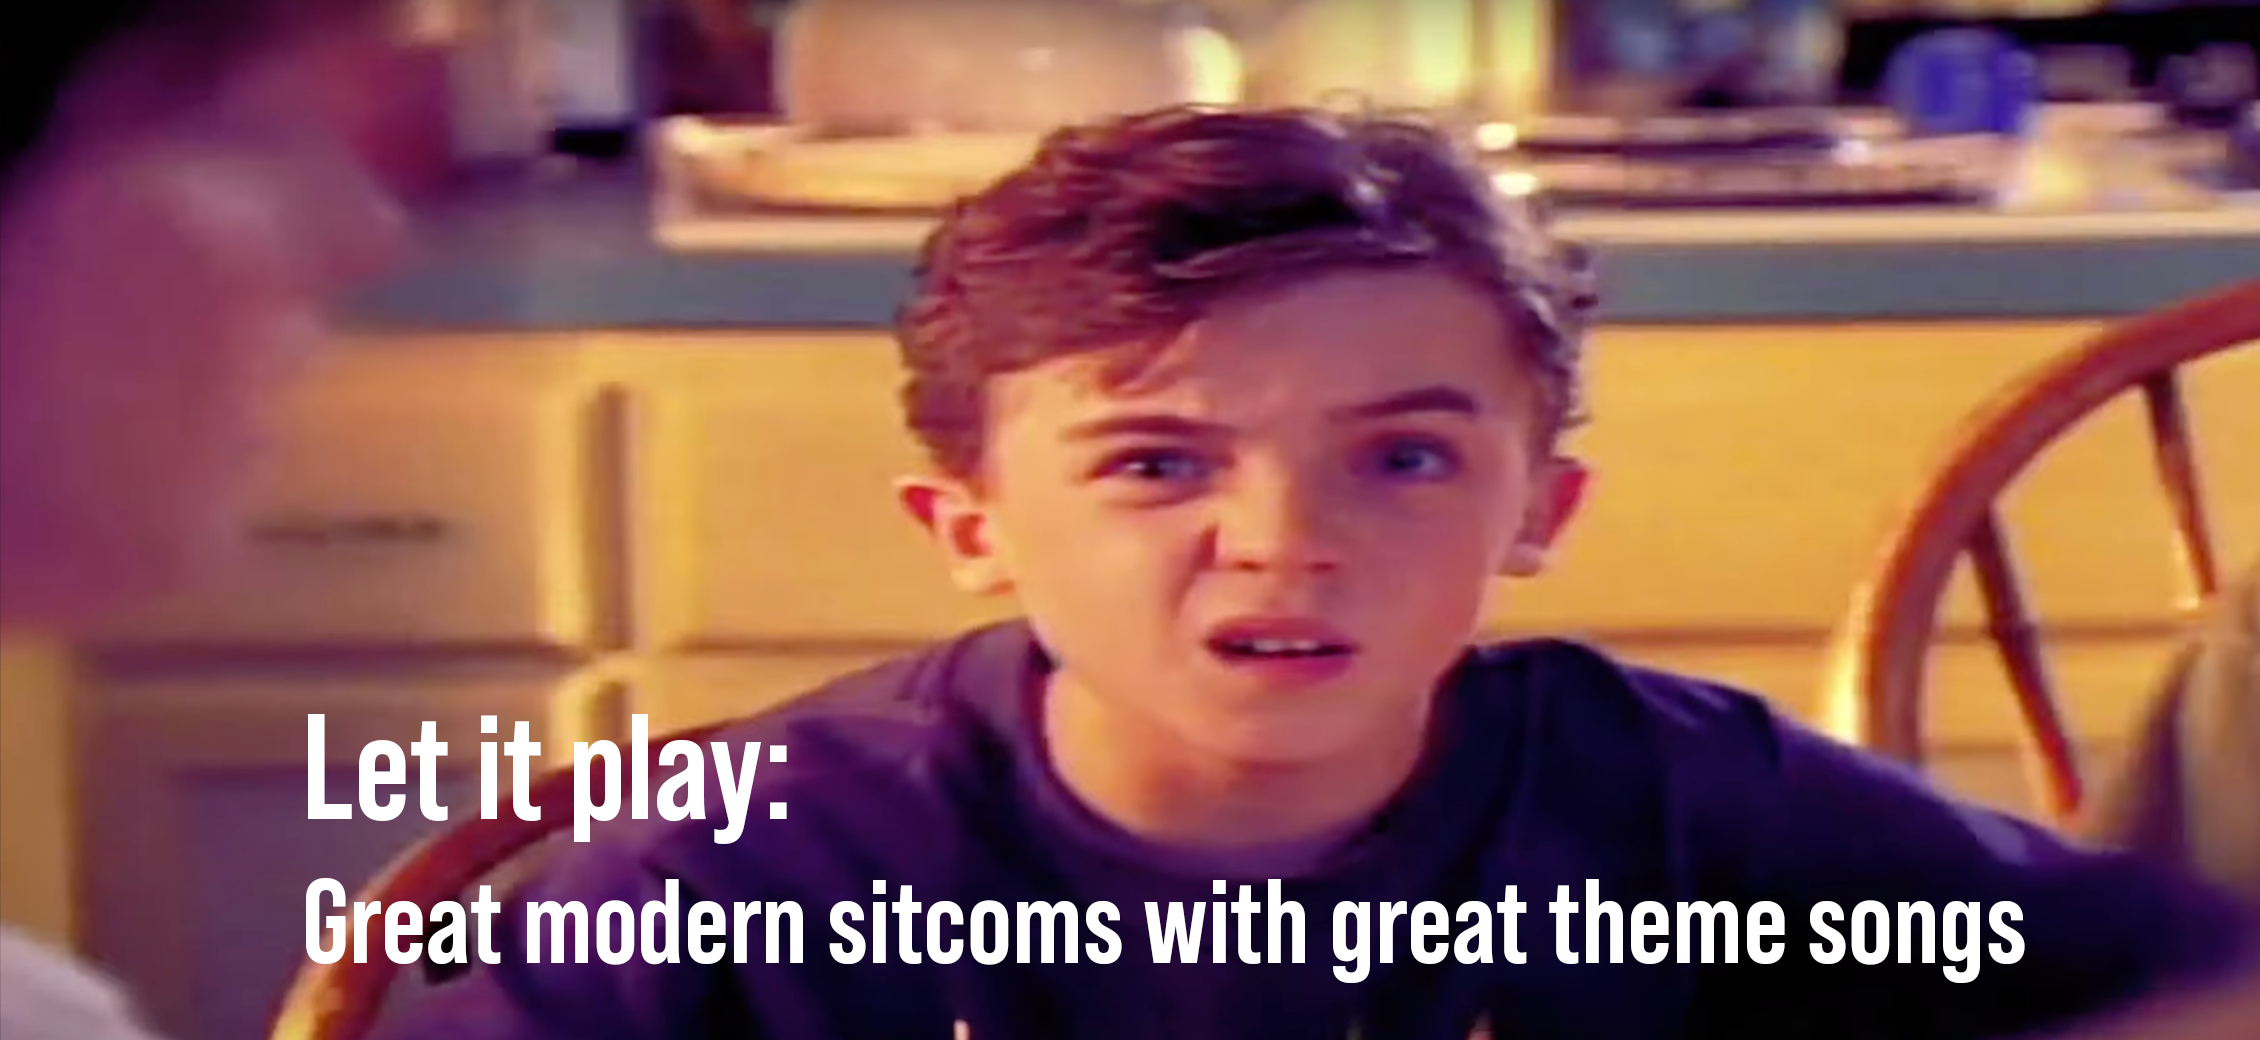 Let it play: Great modern TV sitcoms with great theme songs